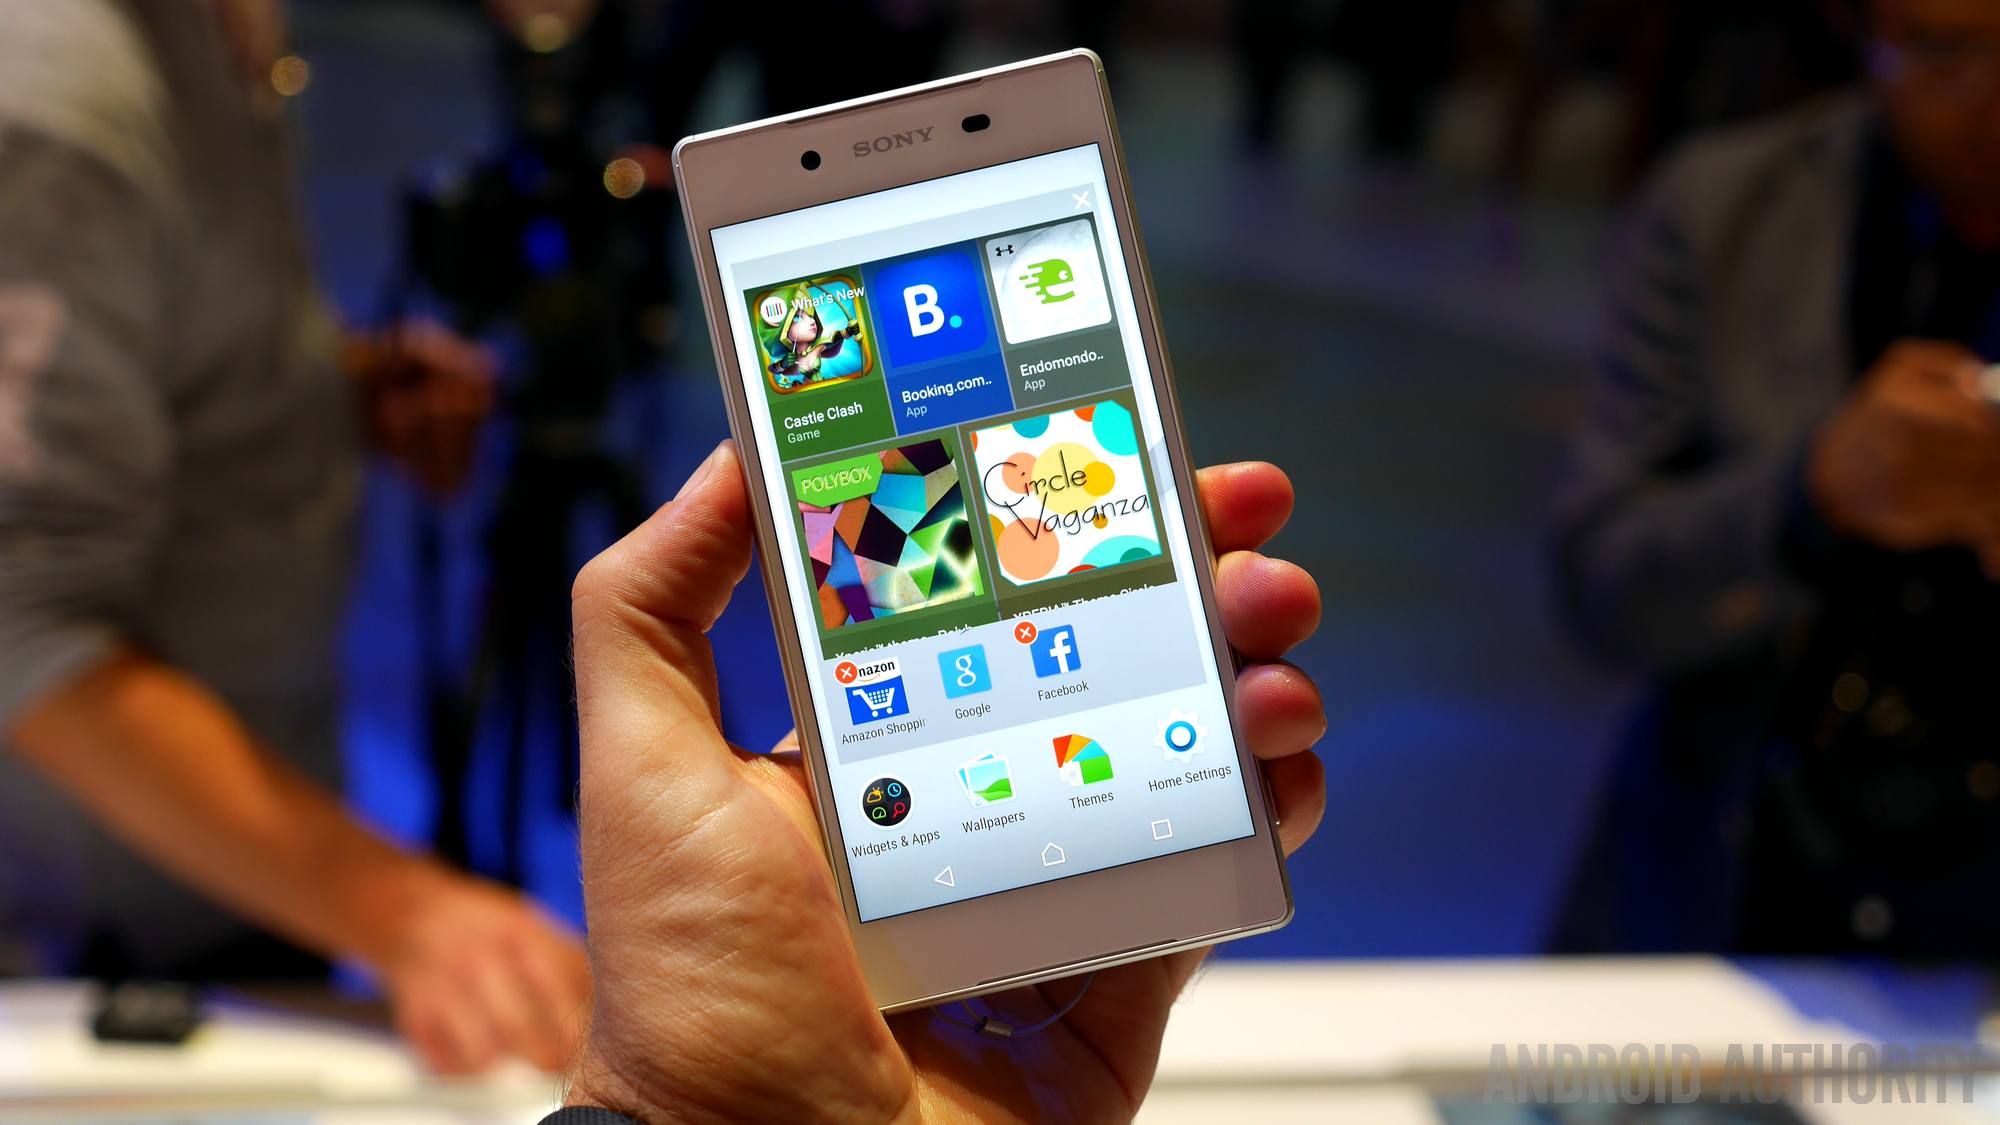 Sony Xperia Z5 Hands On And First Look